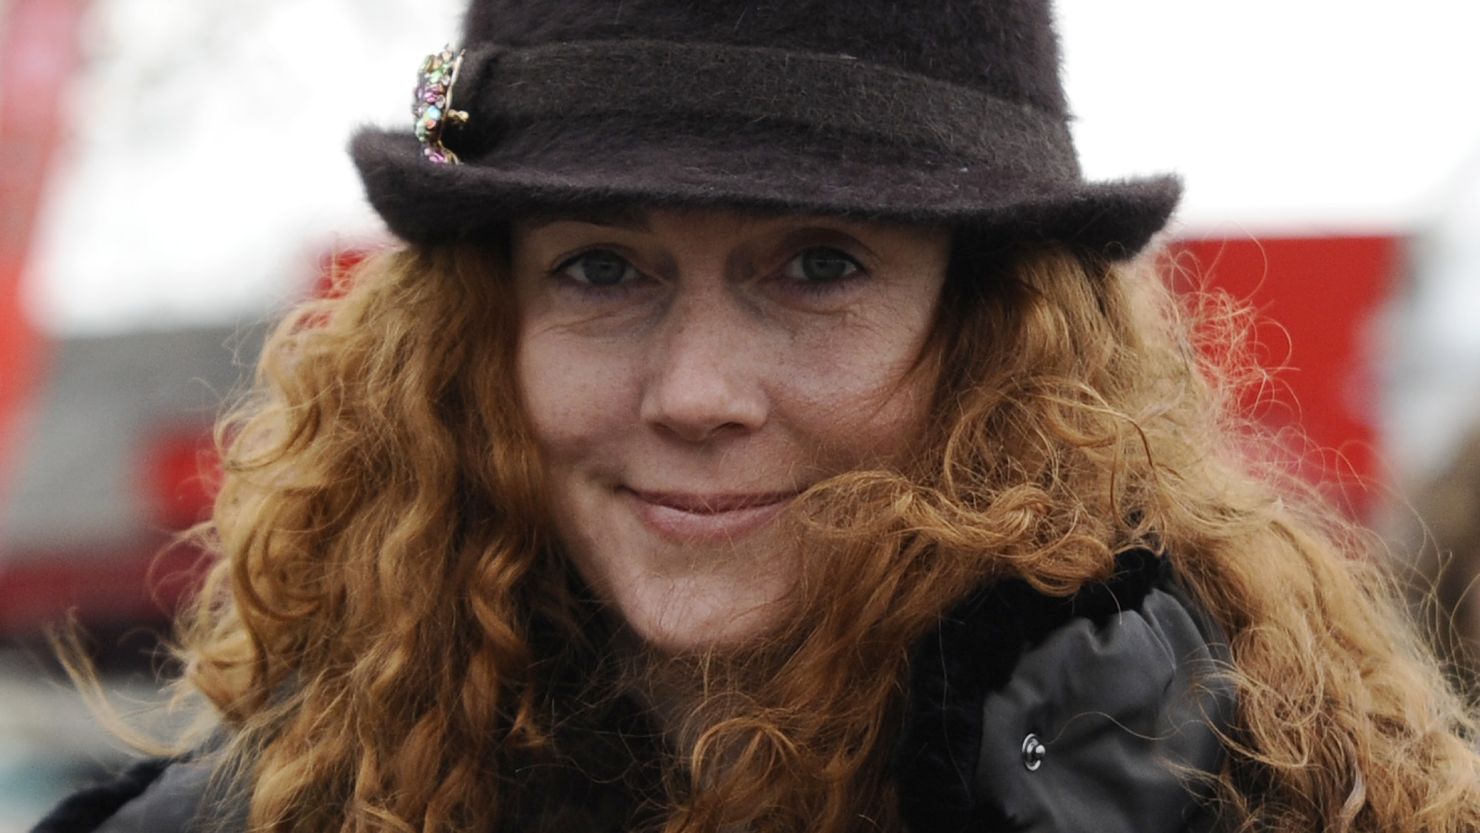 A day after Rebekah Brooks' arrest, a 51-year-old man was arrested on Wednesday on suspicion of intimidation of a witness